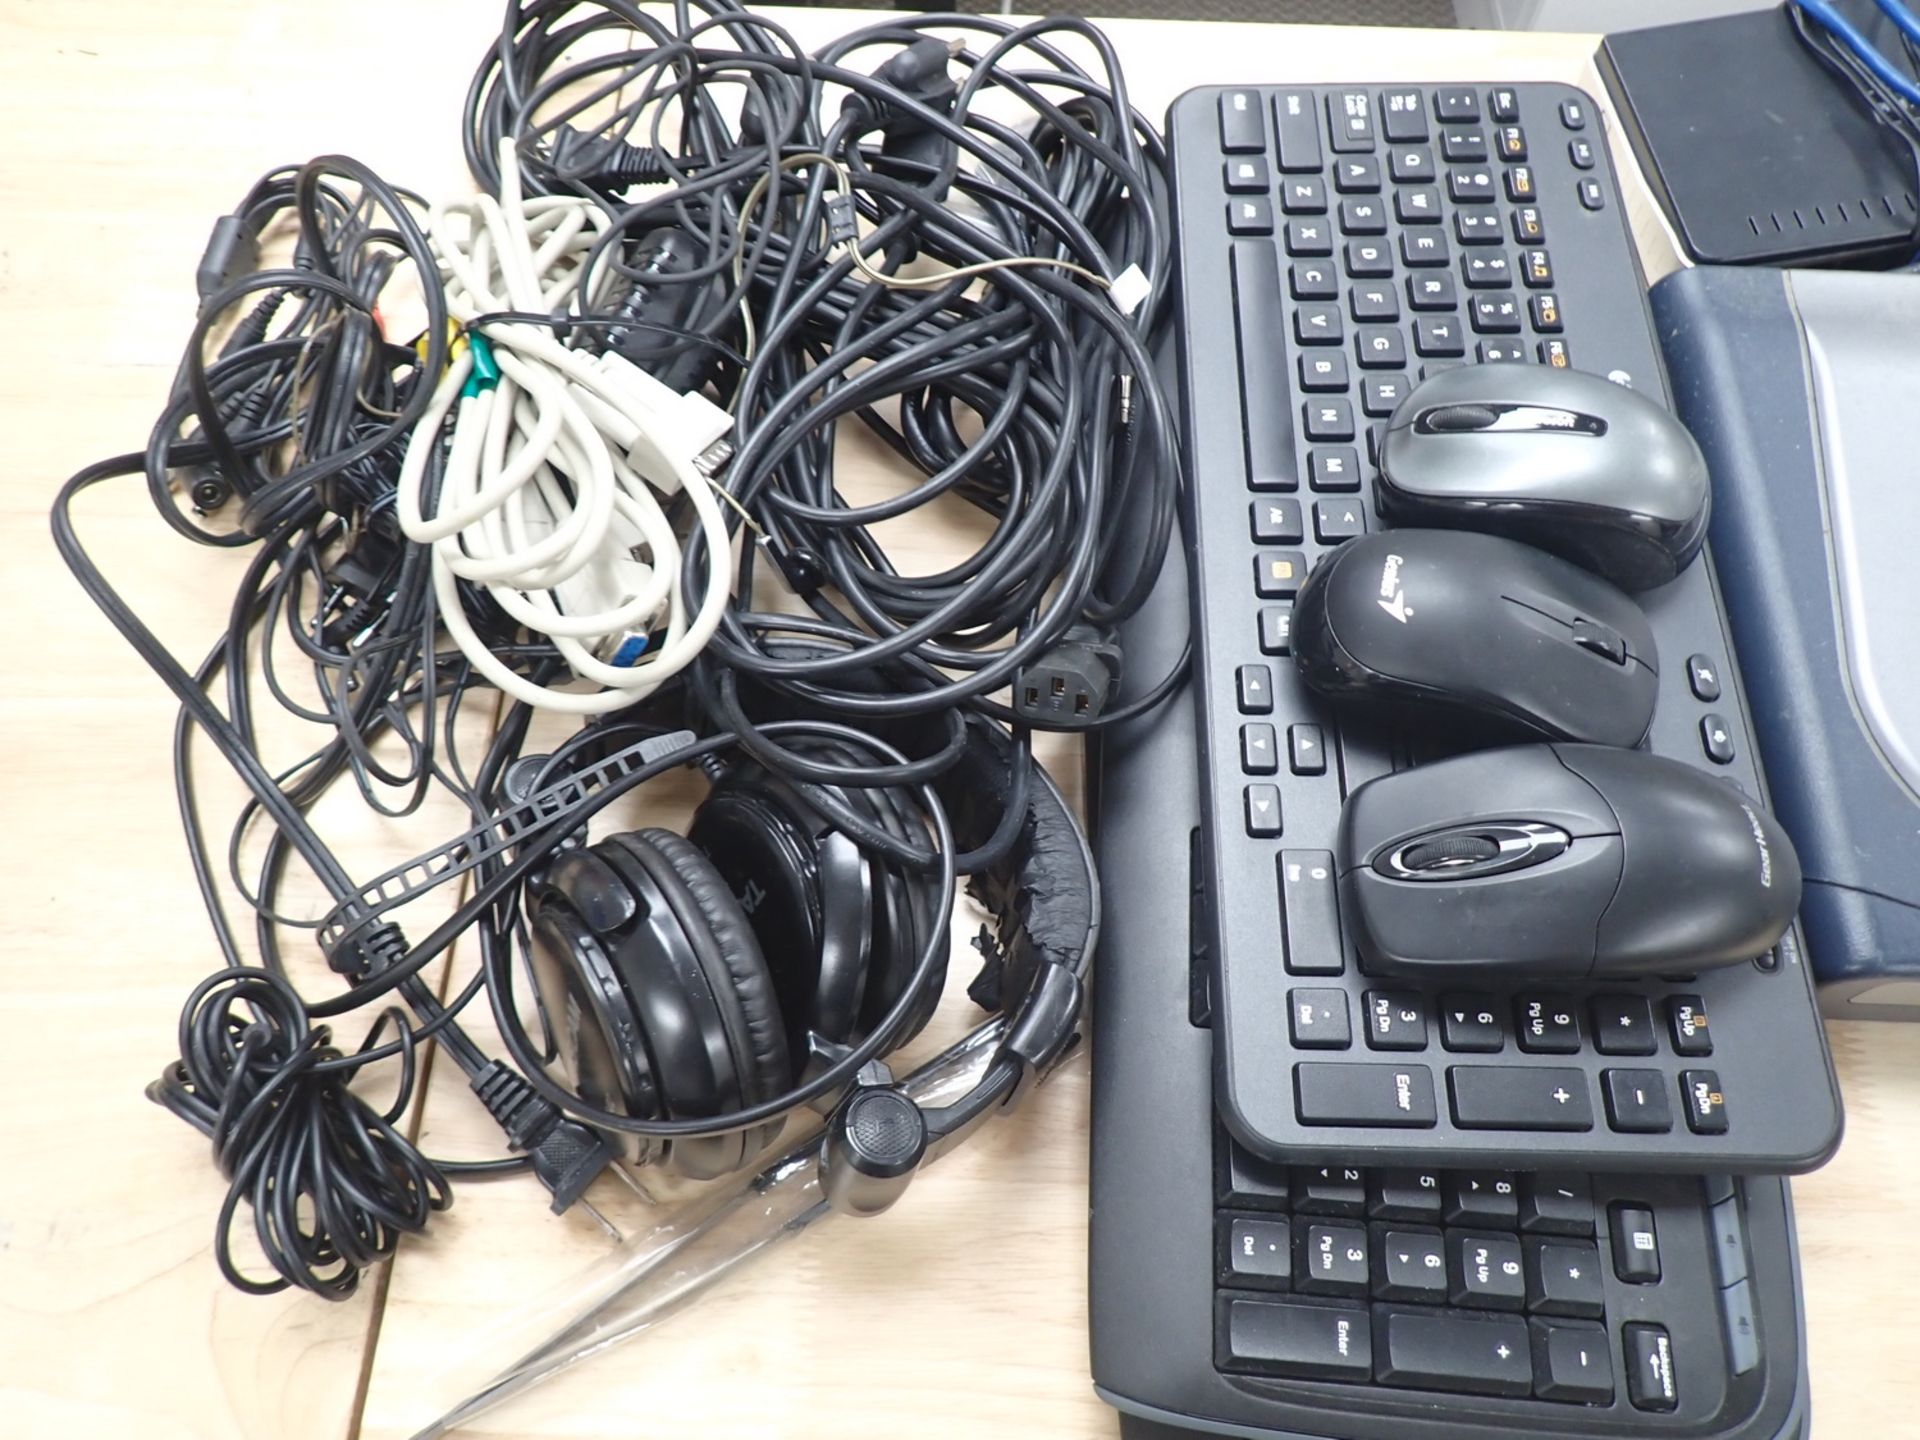 LOT - KEYBOARDS, MICE, TELEPHONES D LINK, ETC - Image 3 of 3